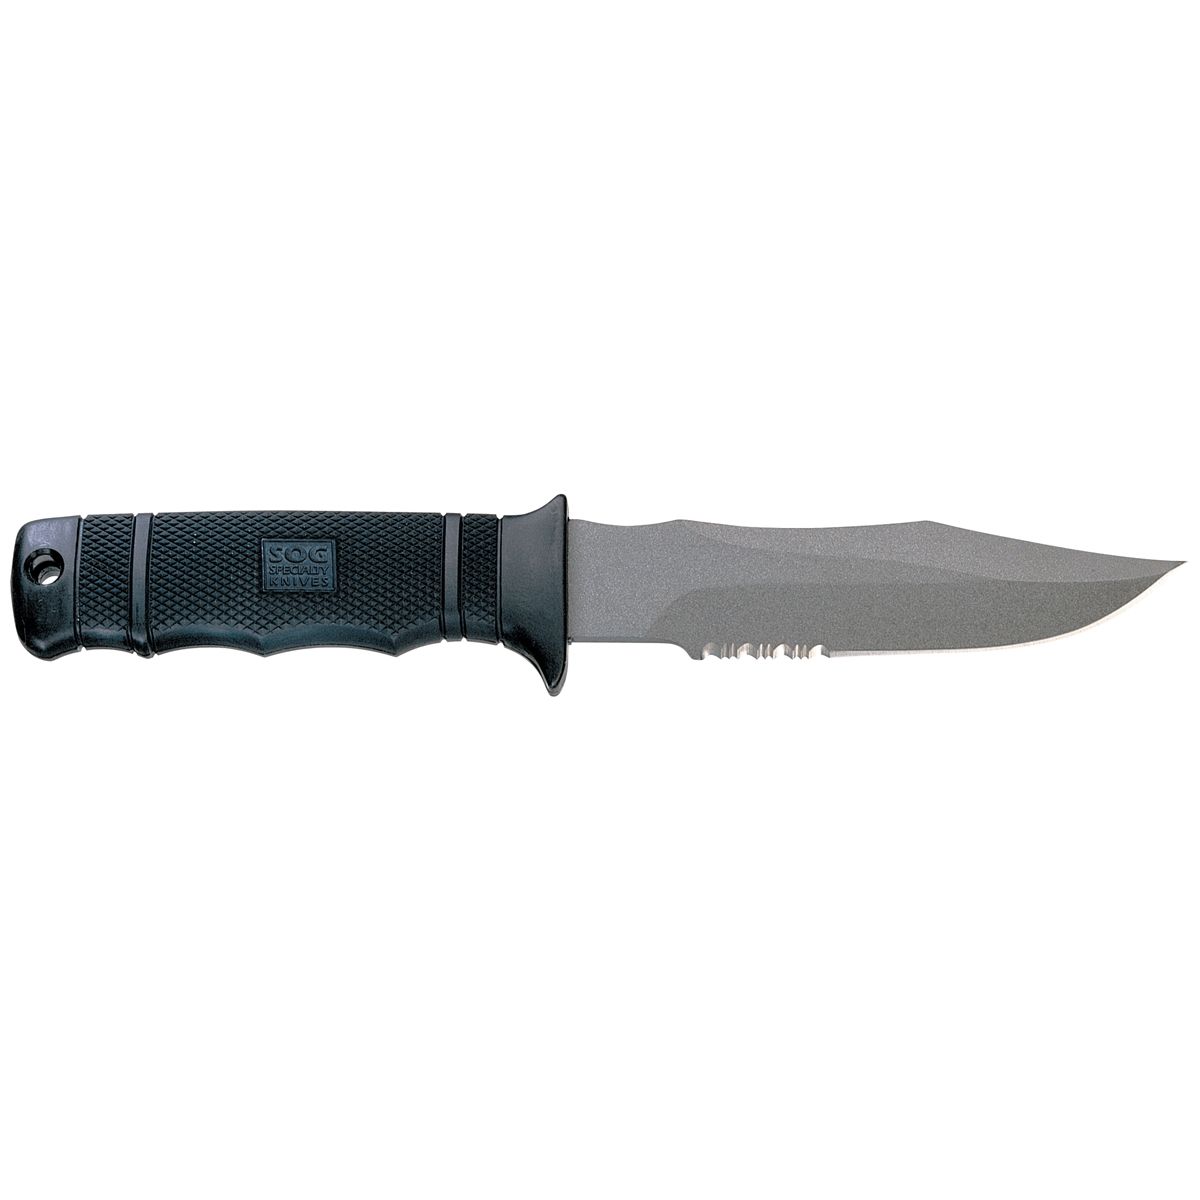 Mini Navy Seal Pup Knife 4.75 Inch